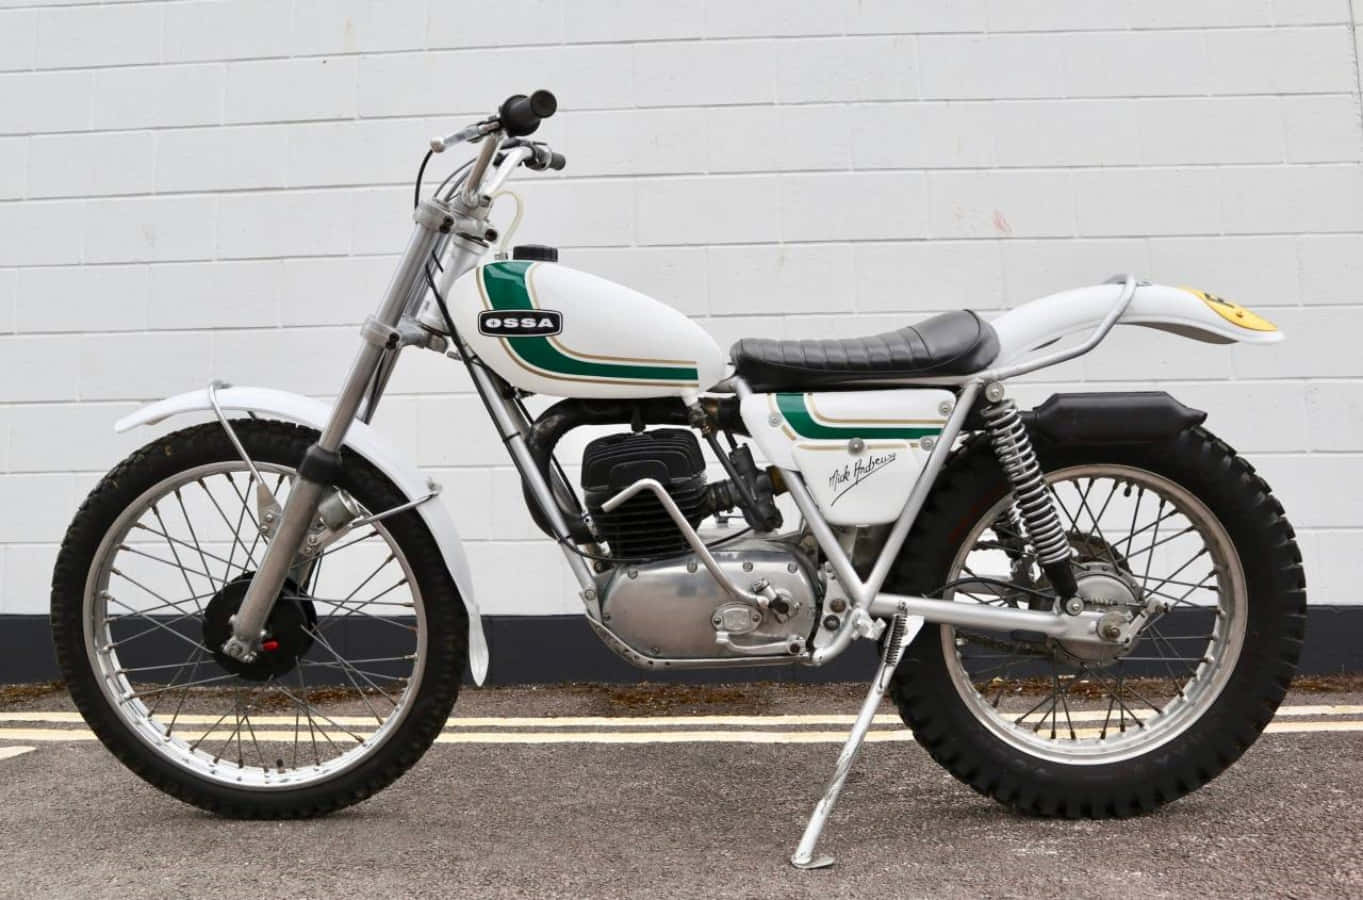 Classic Ossa Motorcycle In Action Wallpaper